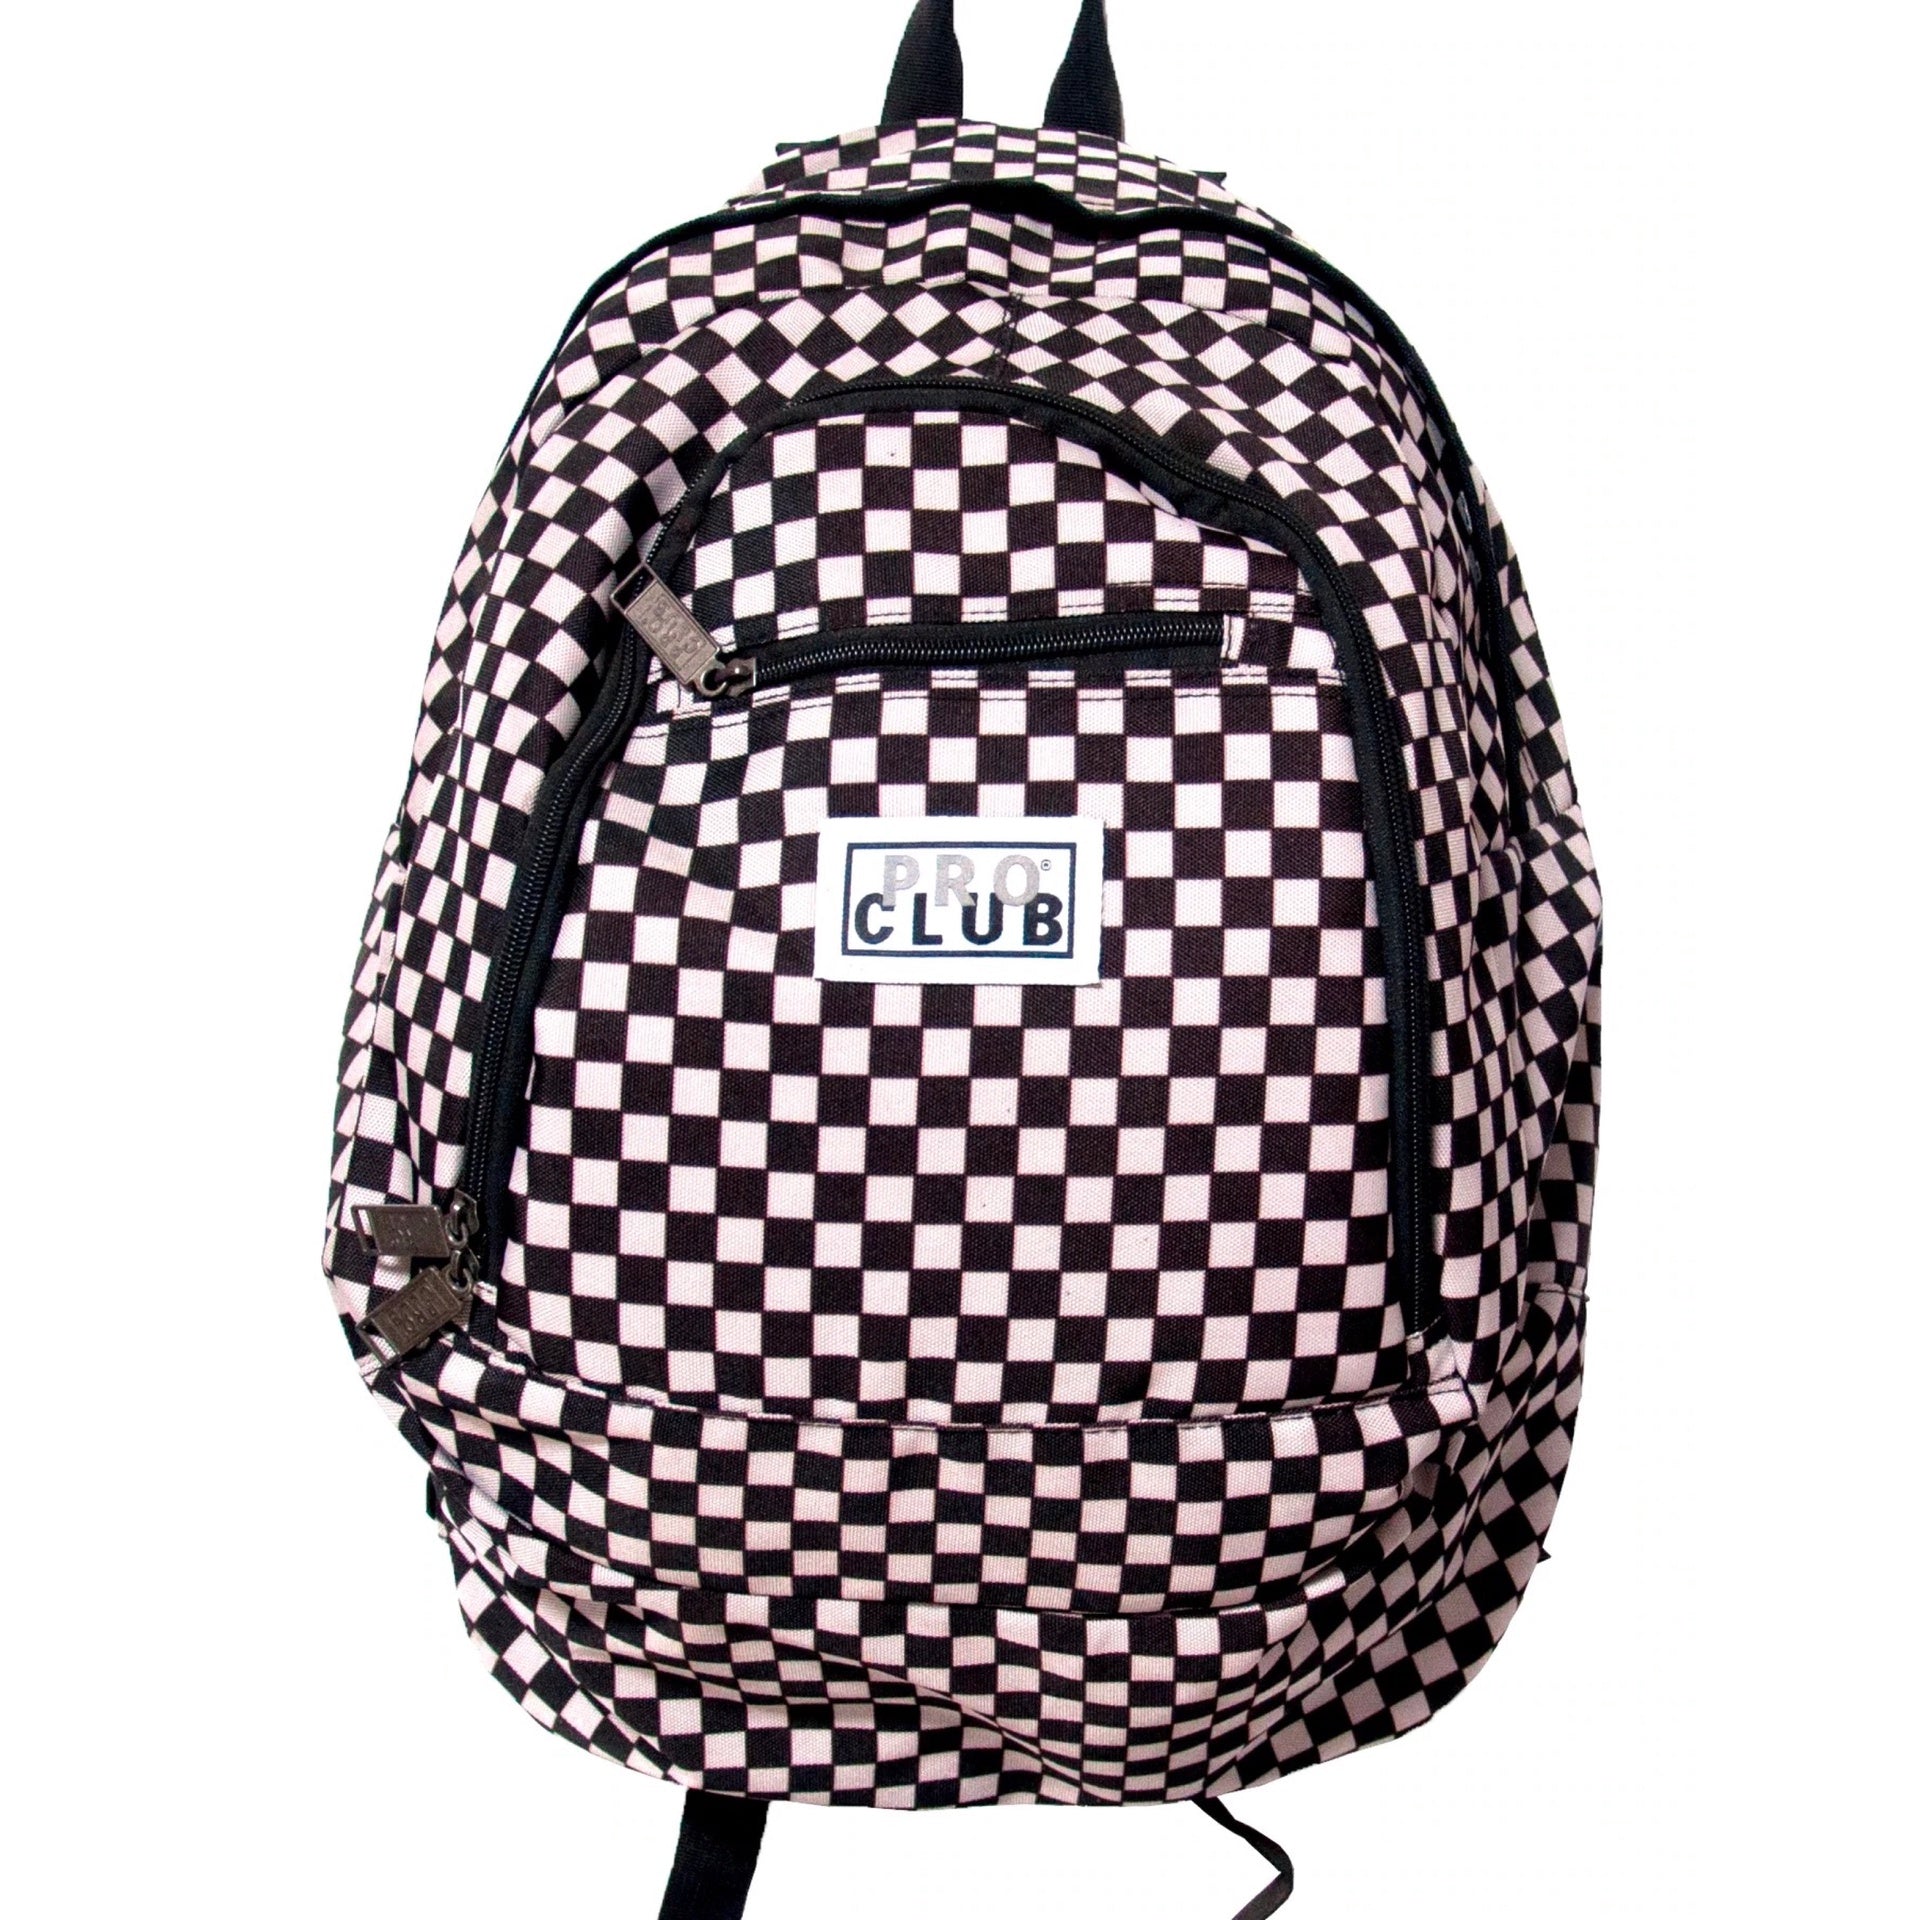 Pro Club Backpack - Square Pattern